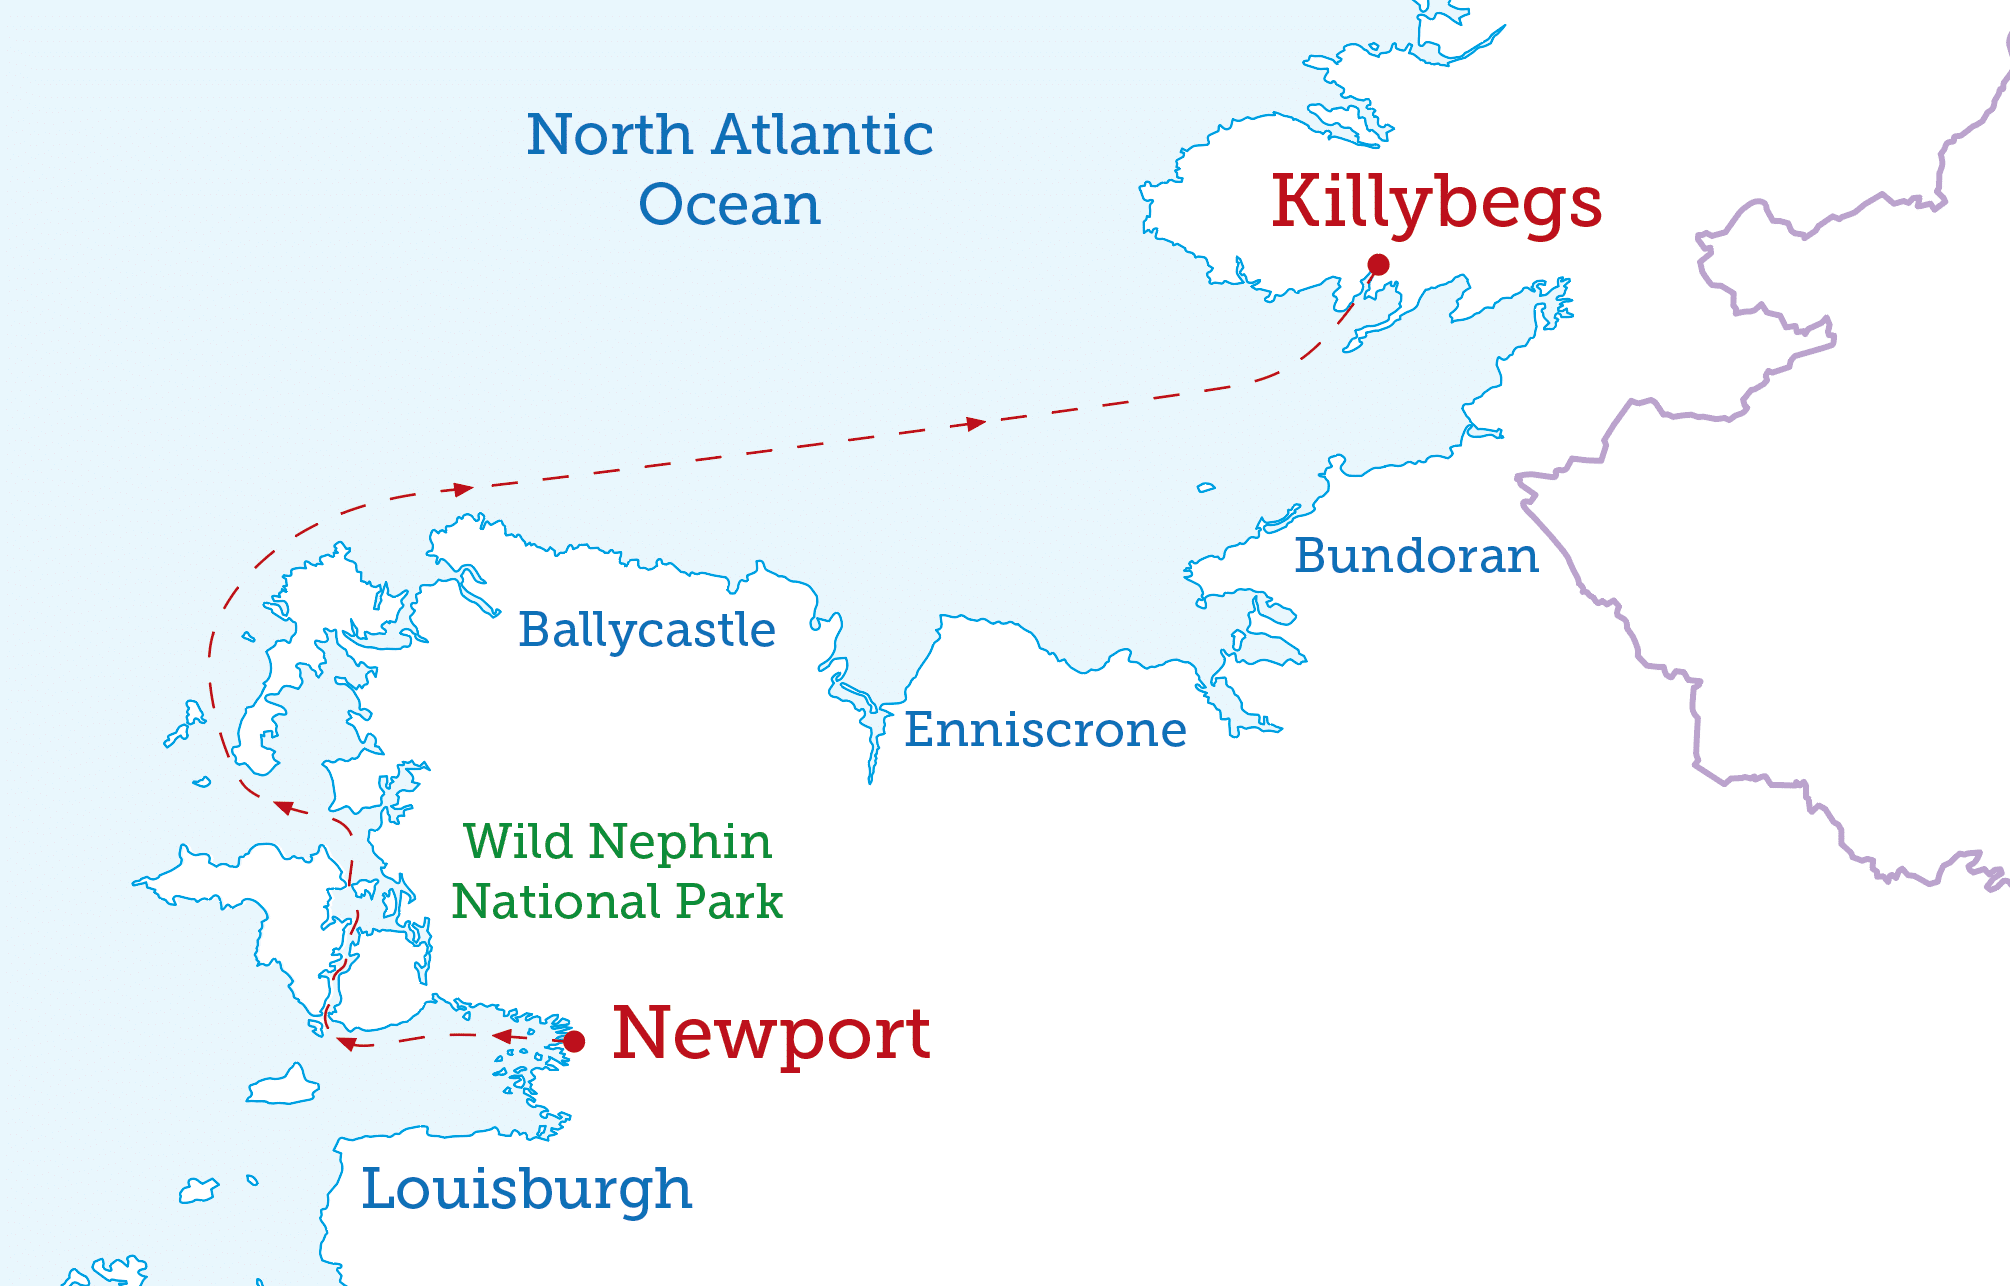 Route Map: Starting at Newport and finishing at Killybegs.